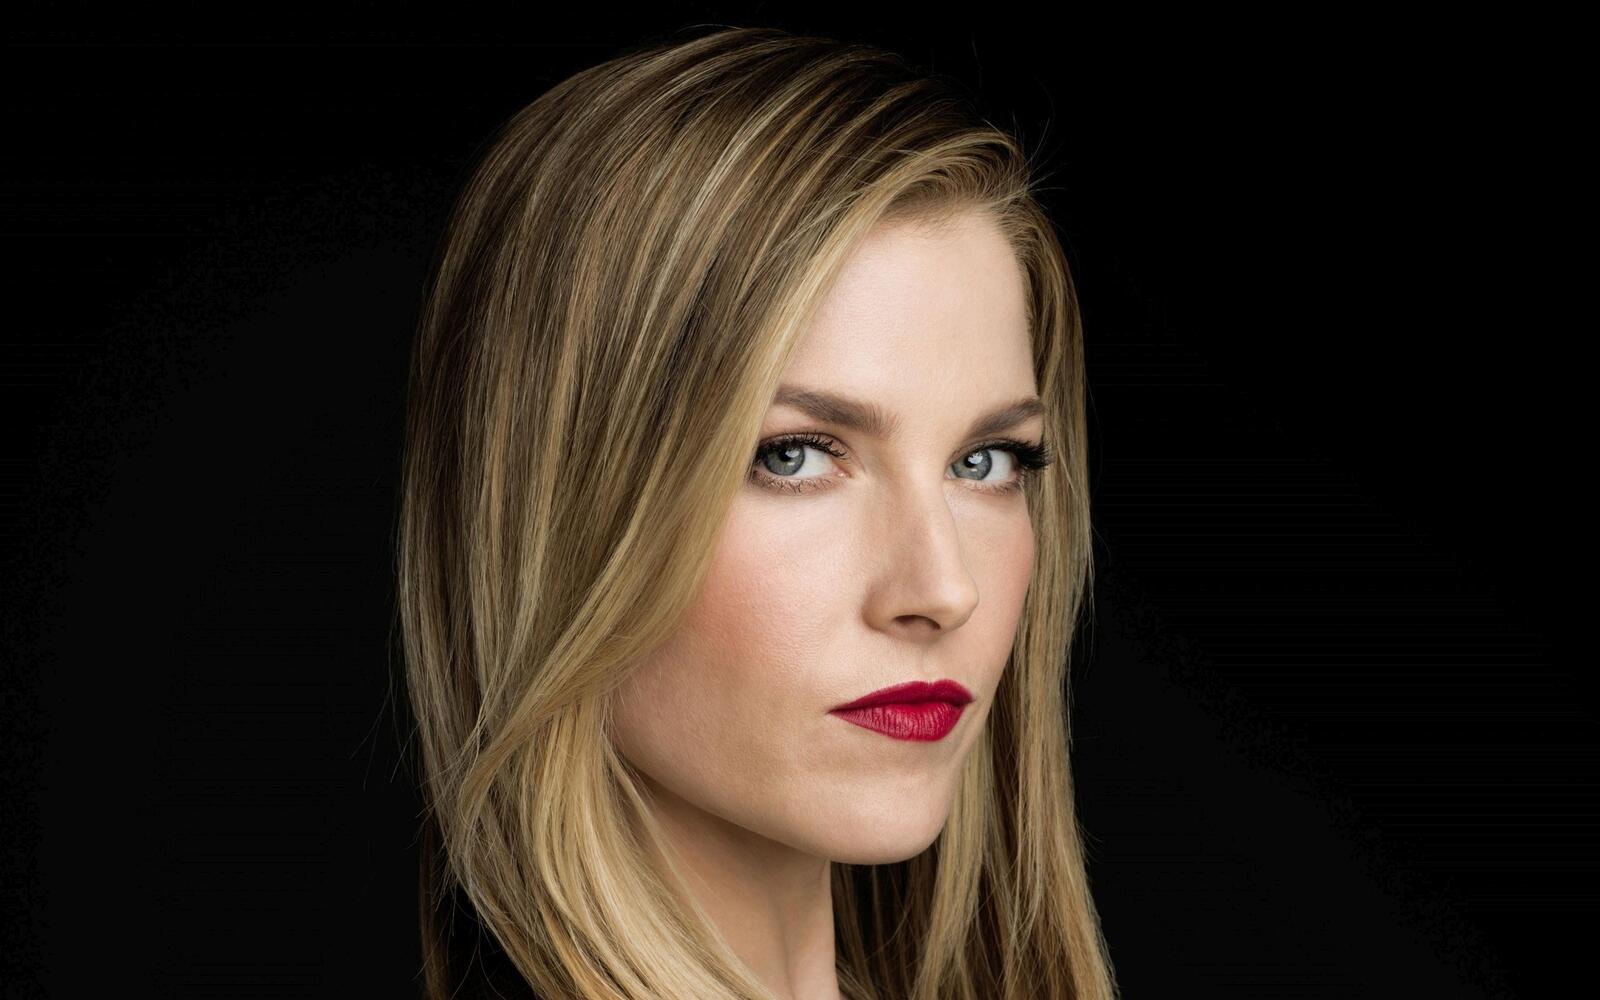 Free photo Ali Larter with red lipstick on her lips.